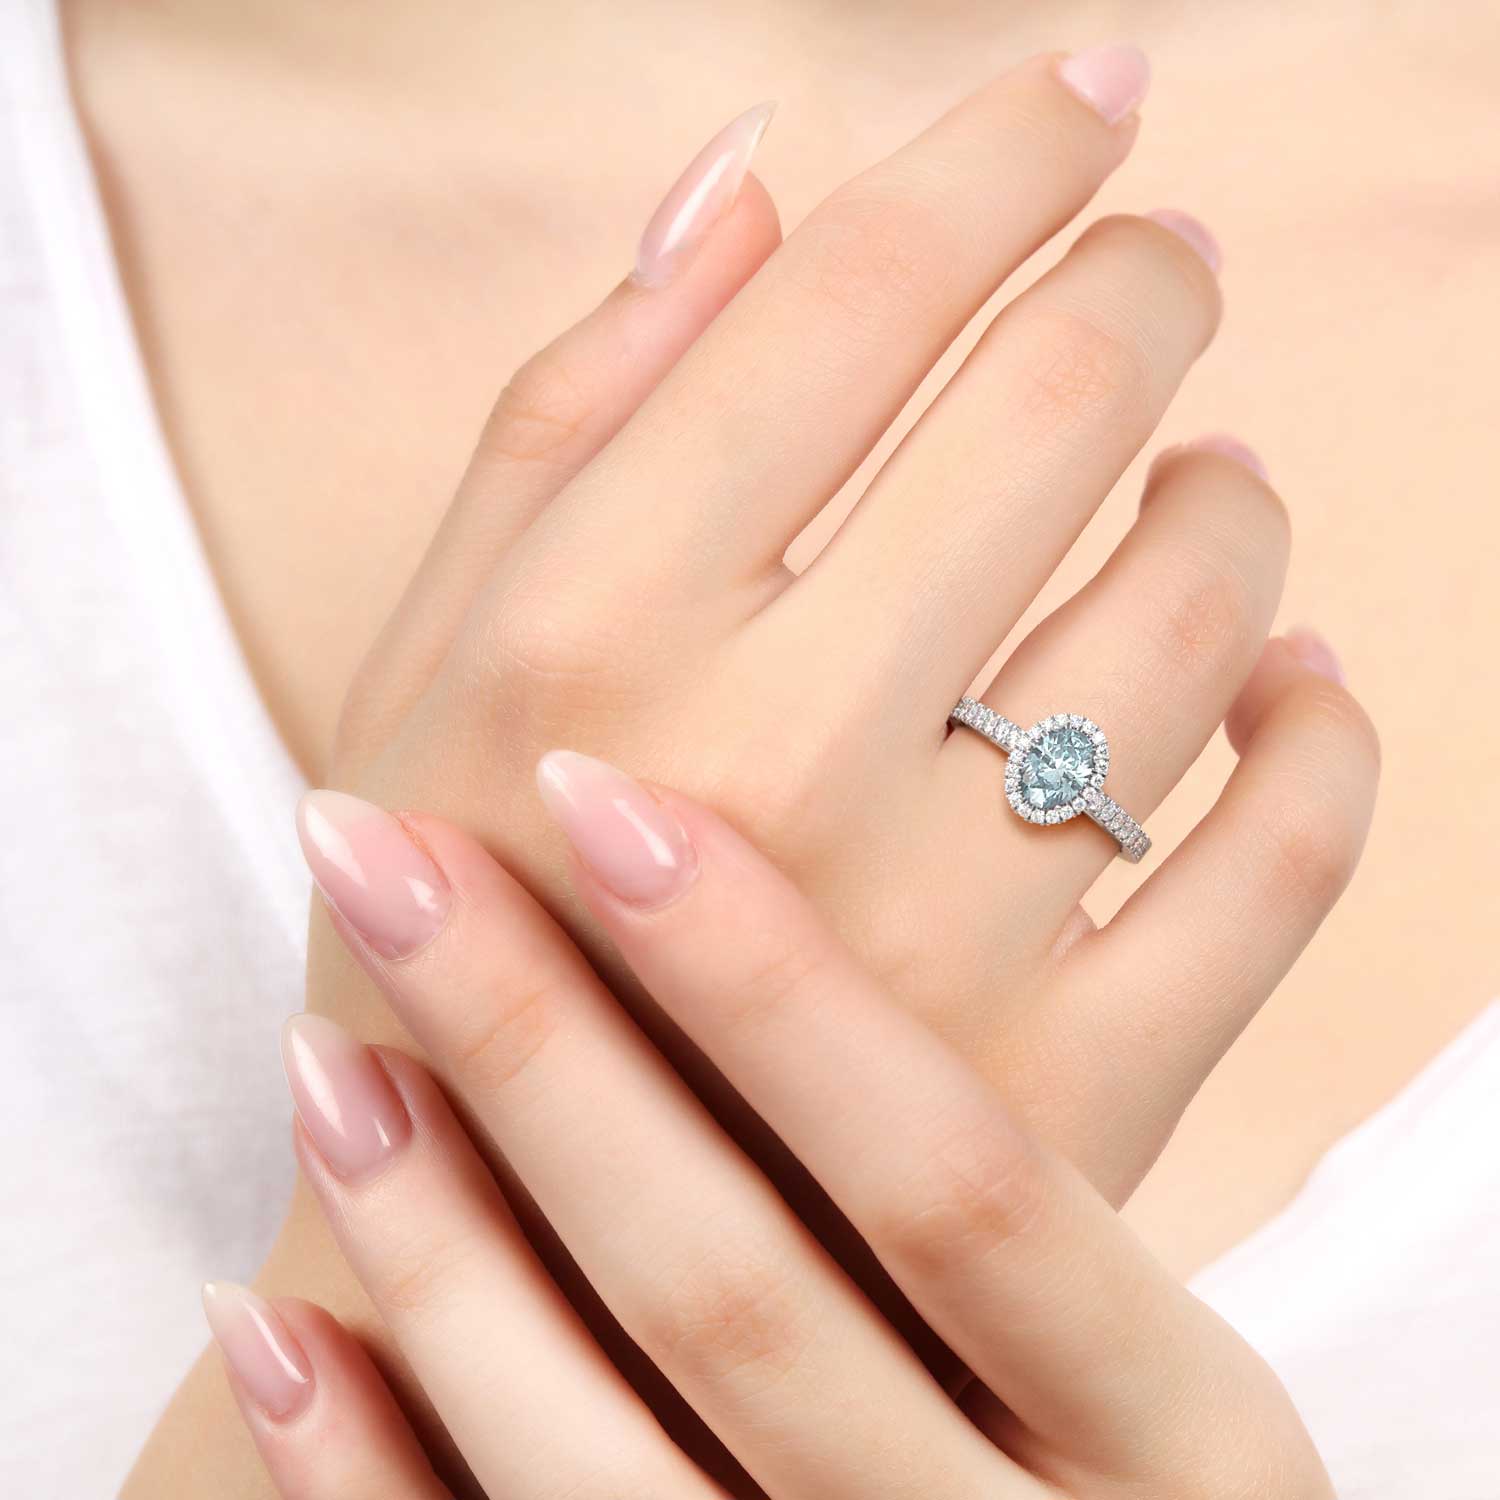 Close-up image of an elegant oval cut aquamarine gemstone ring, set in a halo of sparkling diamonds, worn on a finger.